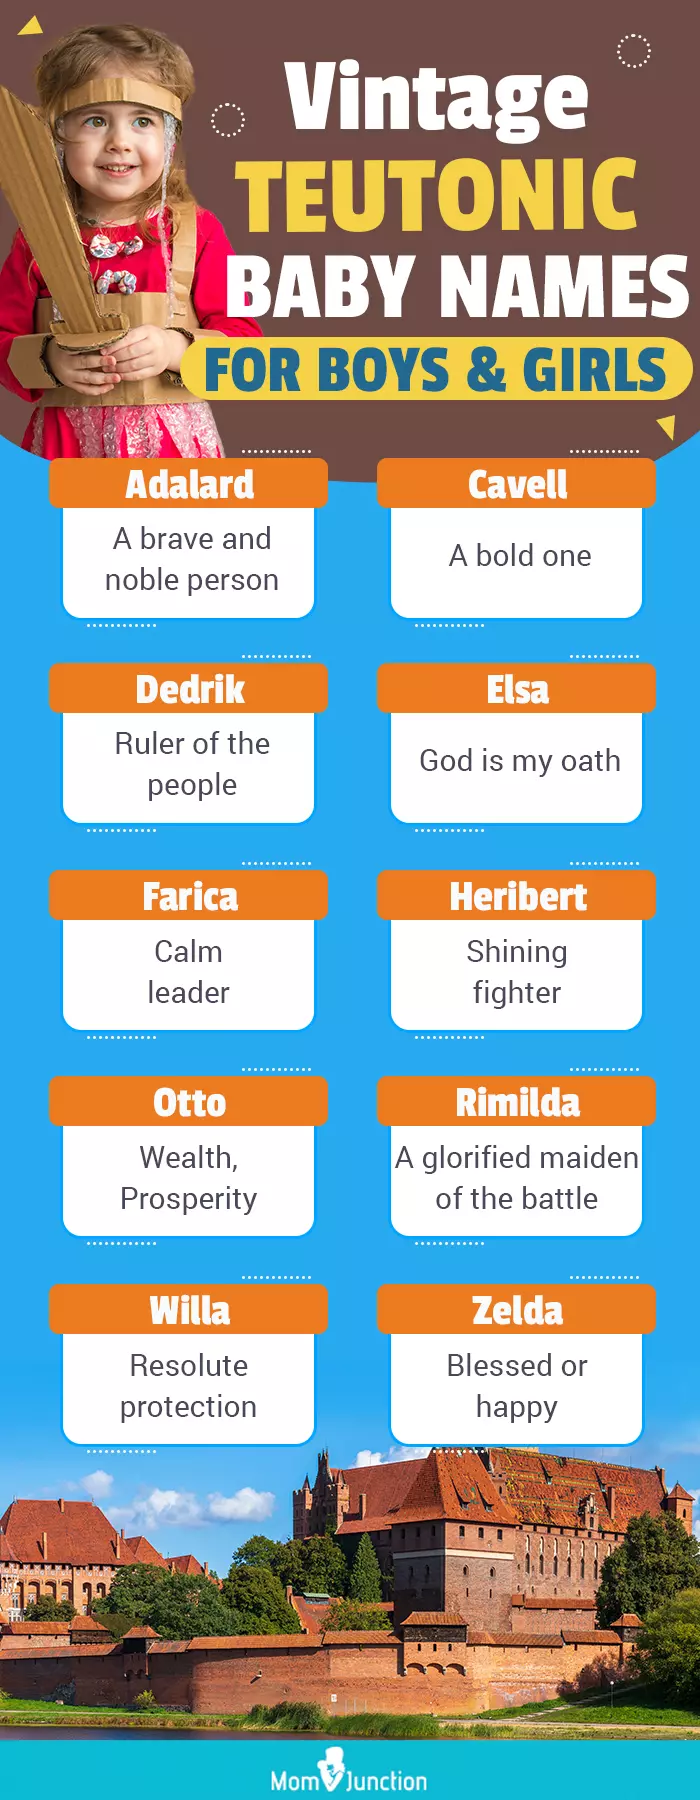 Vintage Teutonic Baby Names For Boys And Girls (infographic)